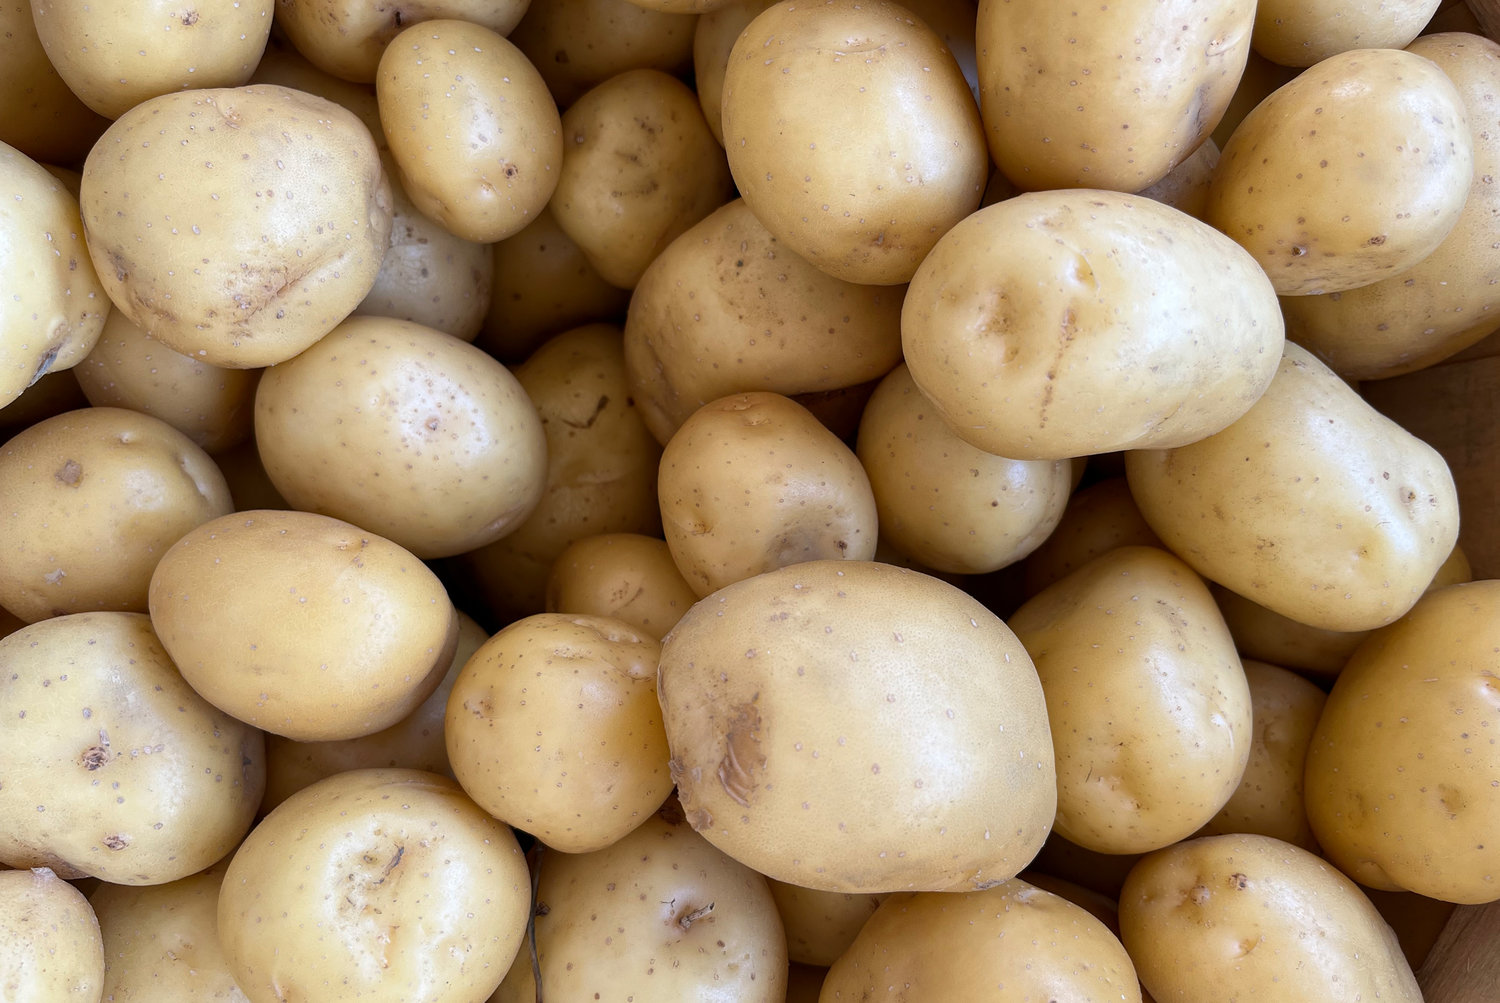 “I love growing potatoes. It’s an addiction,” says Tyler Young